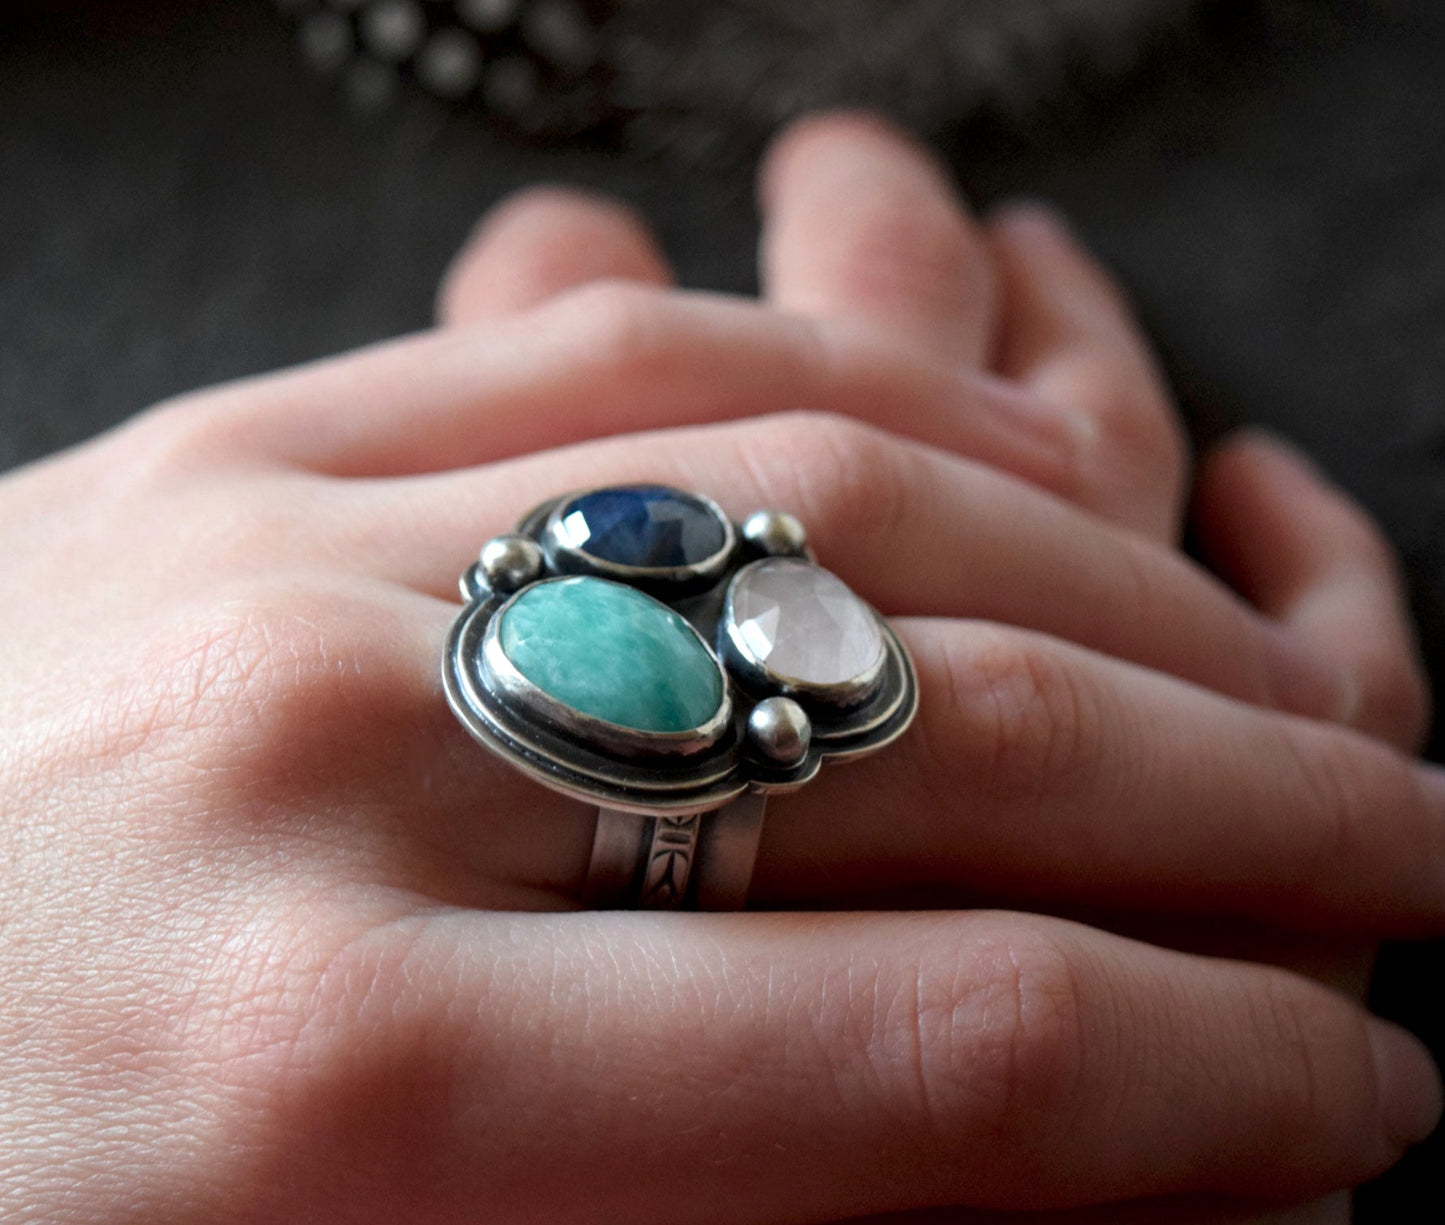 Sterling Silver Gemstone Statement Ring | Sapphire, Rose Quartz, & Amazonite Gems on Floral Wide Band Ring